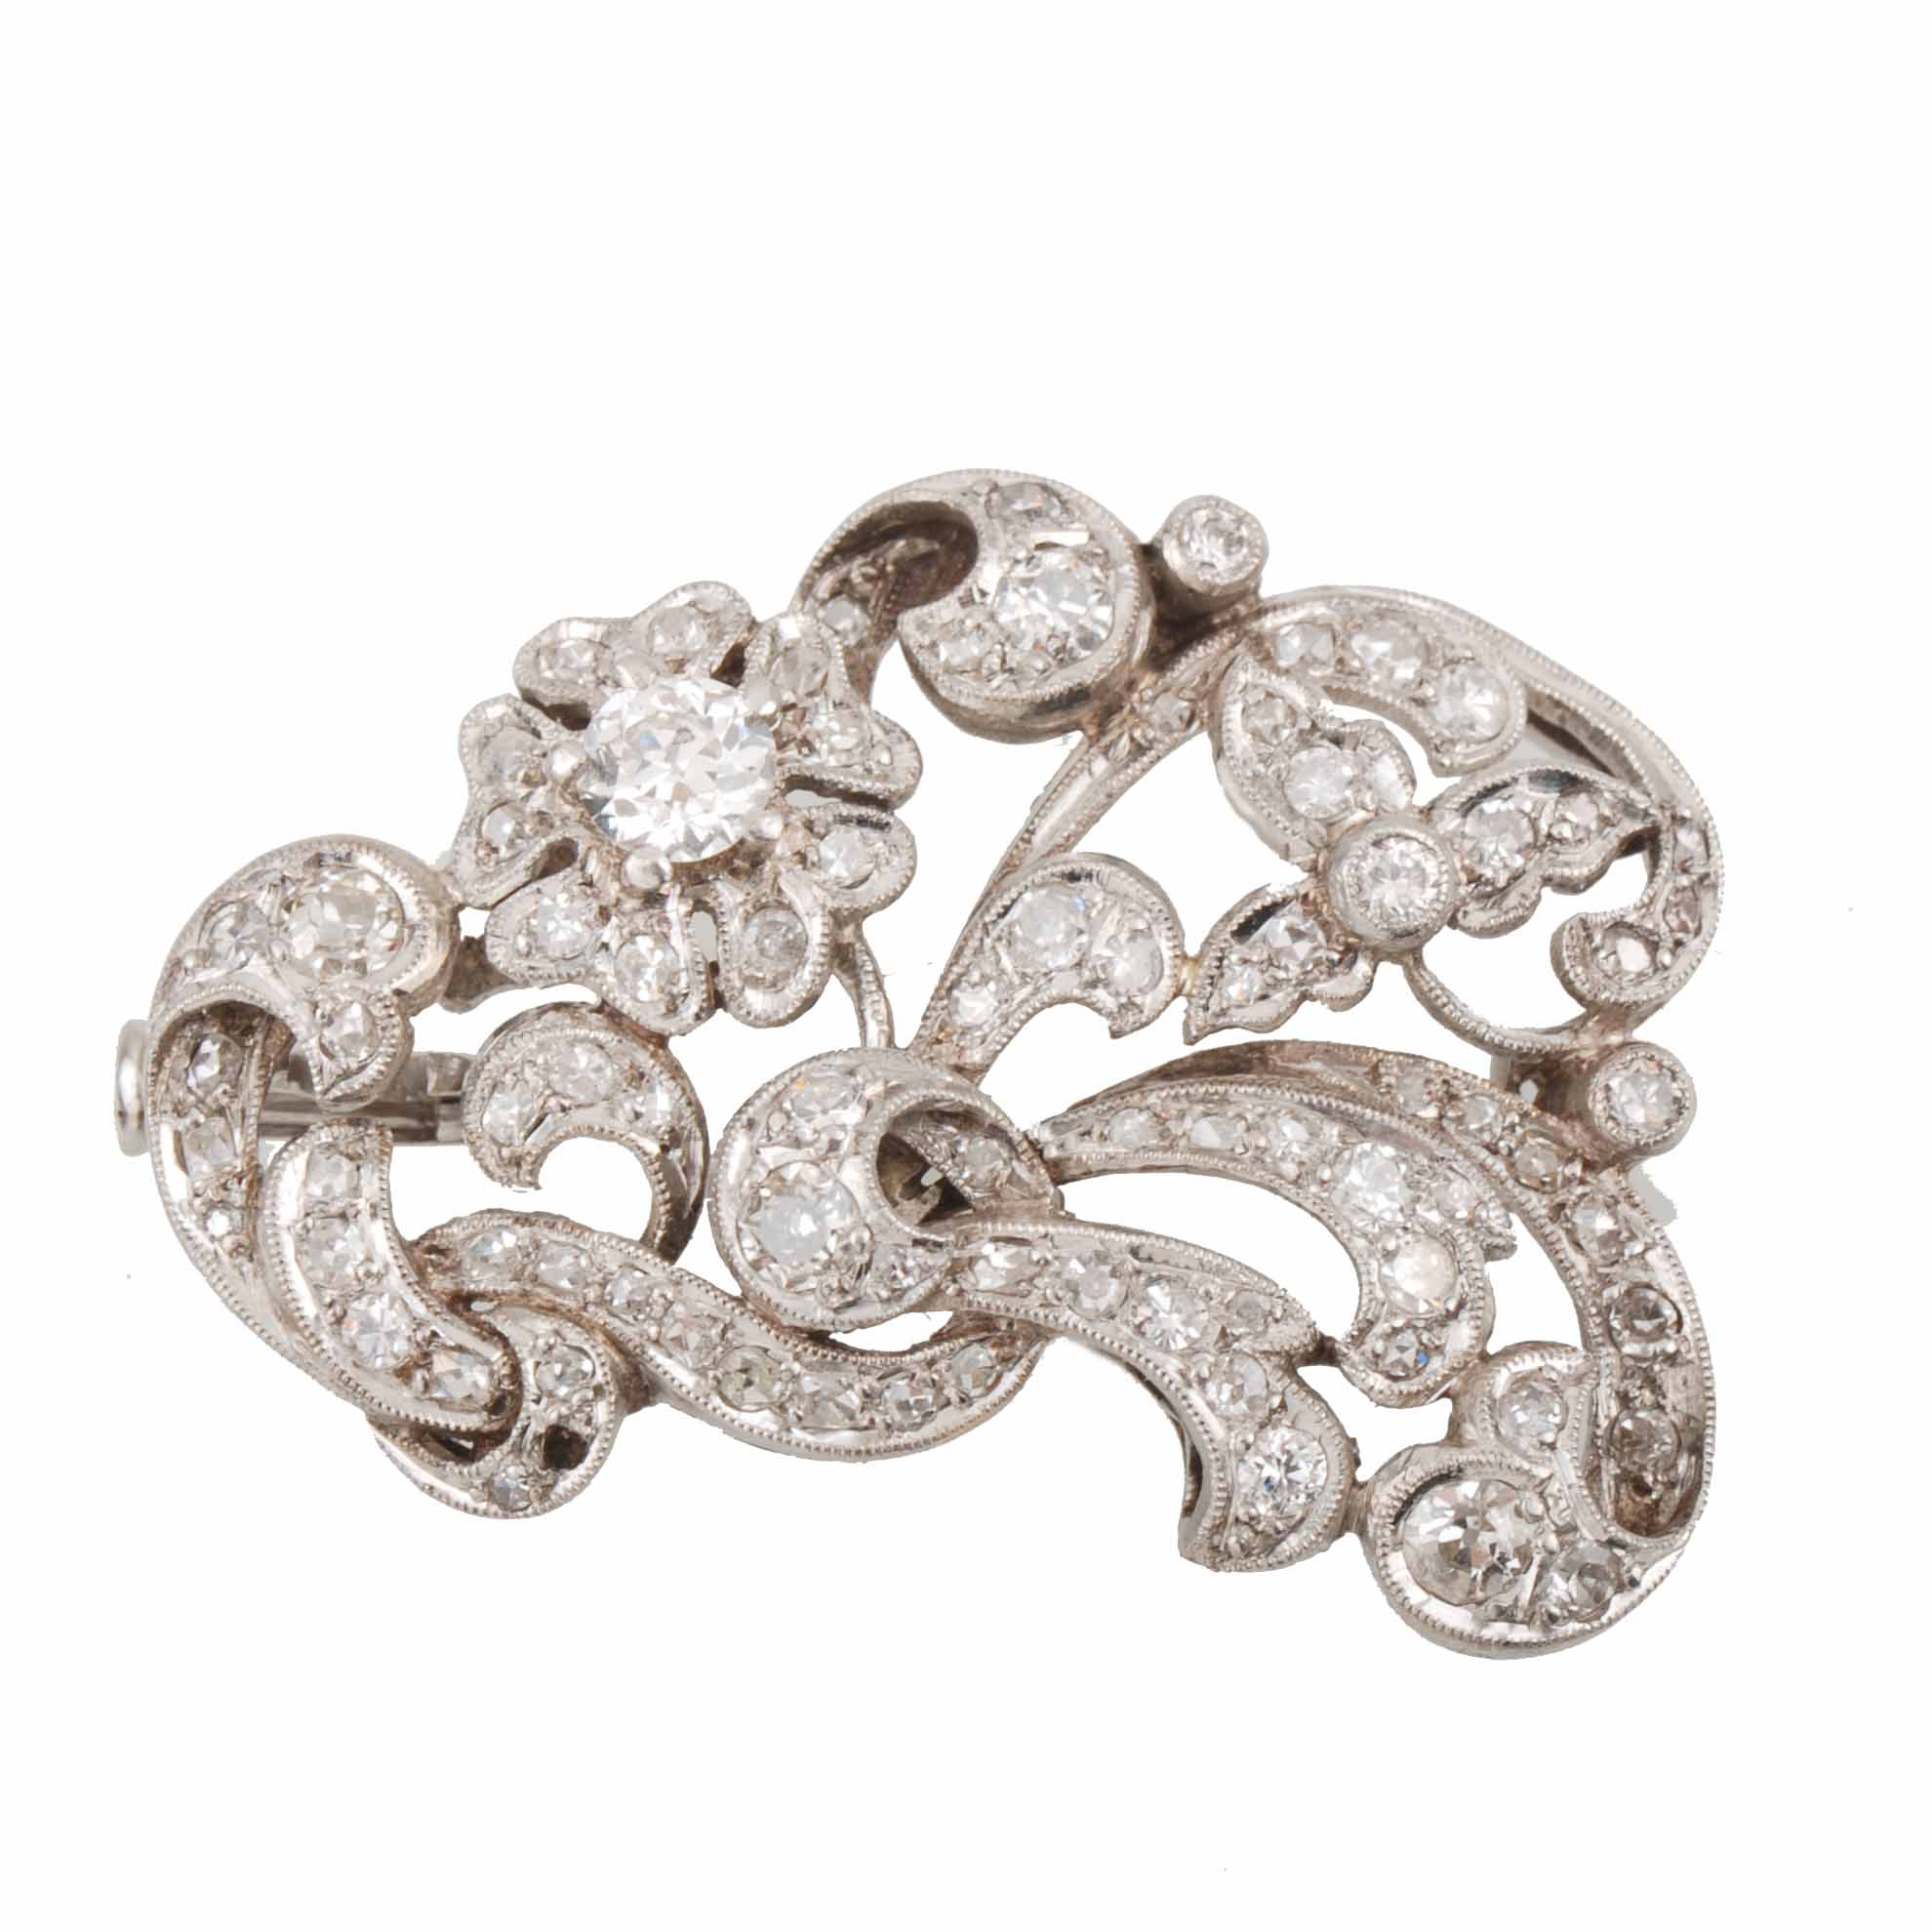 WHITE GOLD BROOCH WITH DIAMONDS.